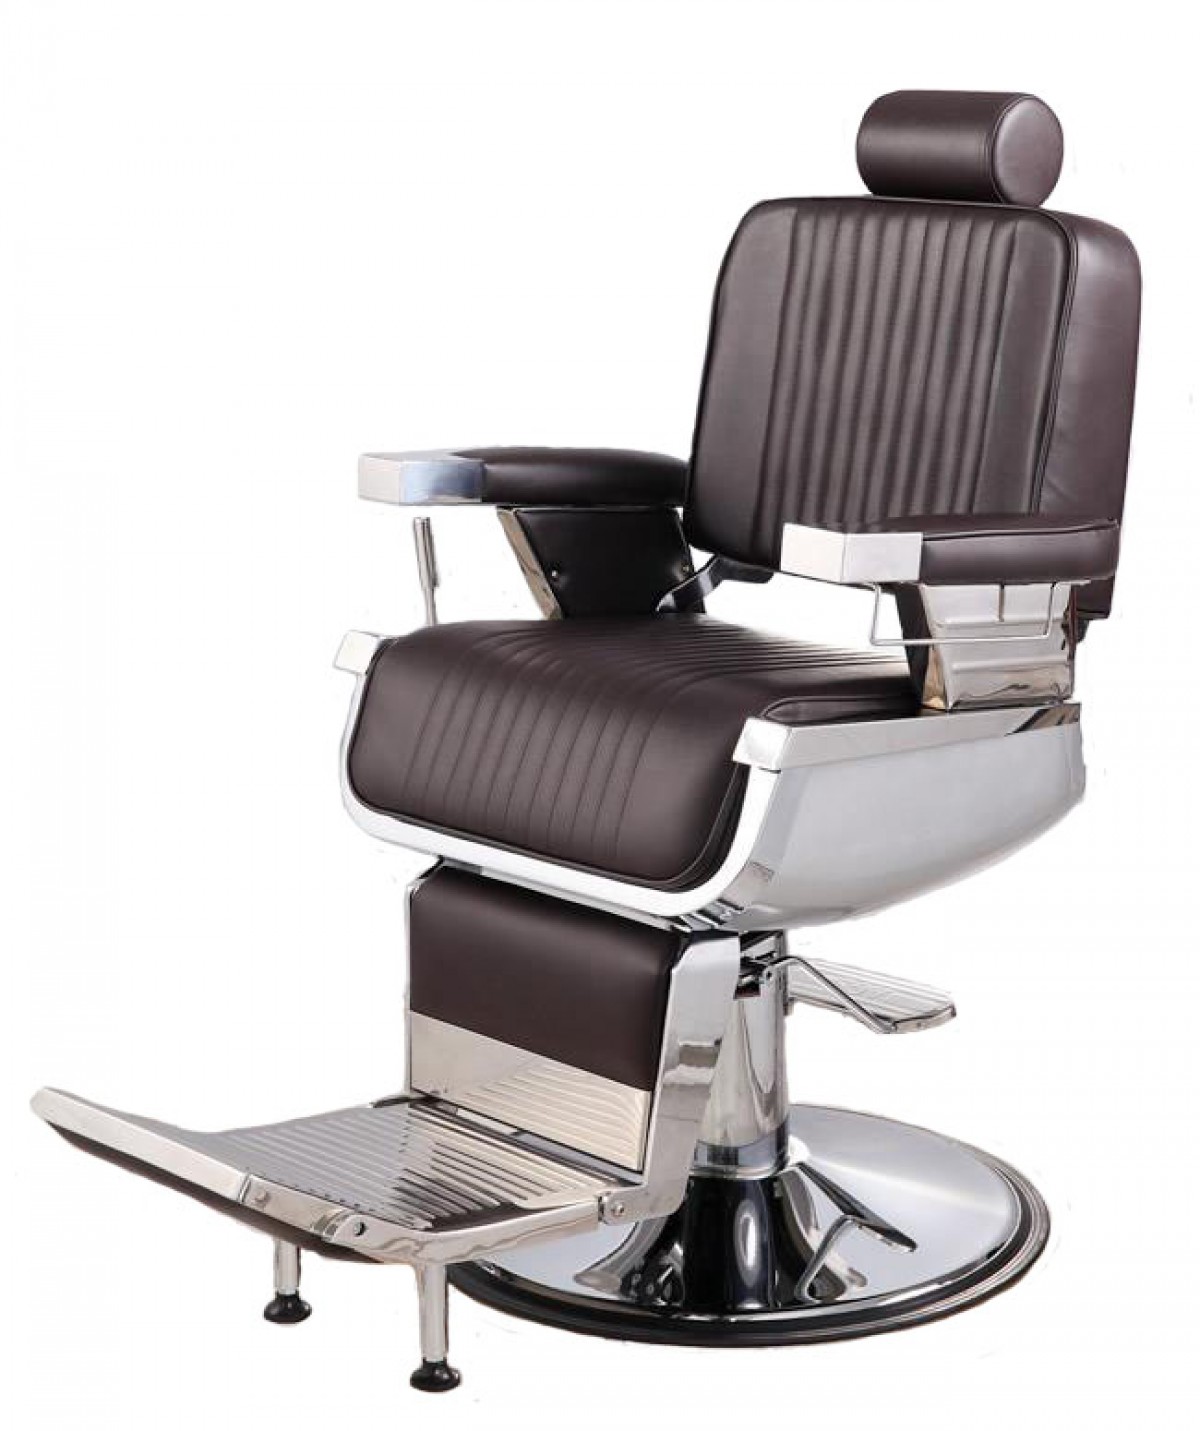 "CONSTANTINE" Barber Chair in Soft Chocolate - Brown ...